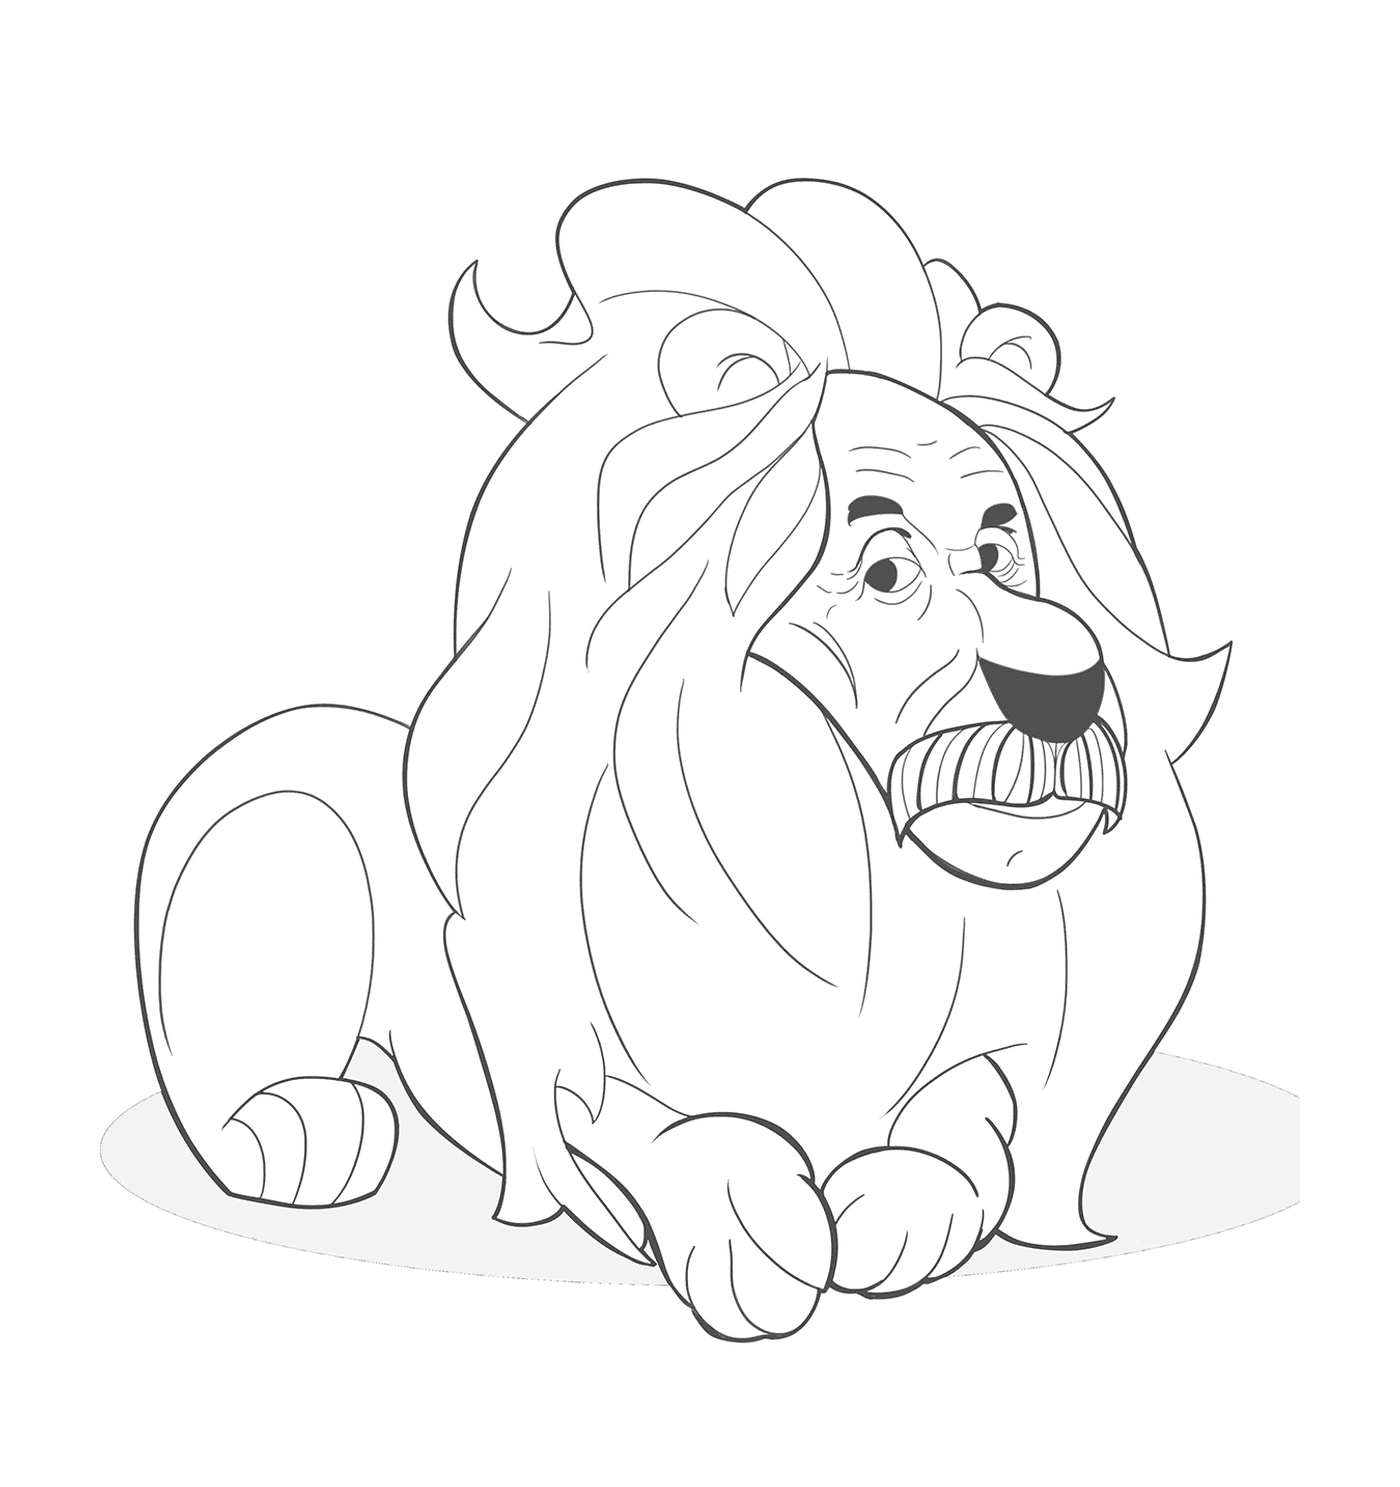  Lion wise, mouth open 